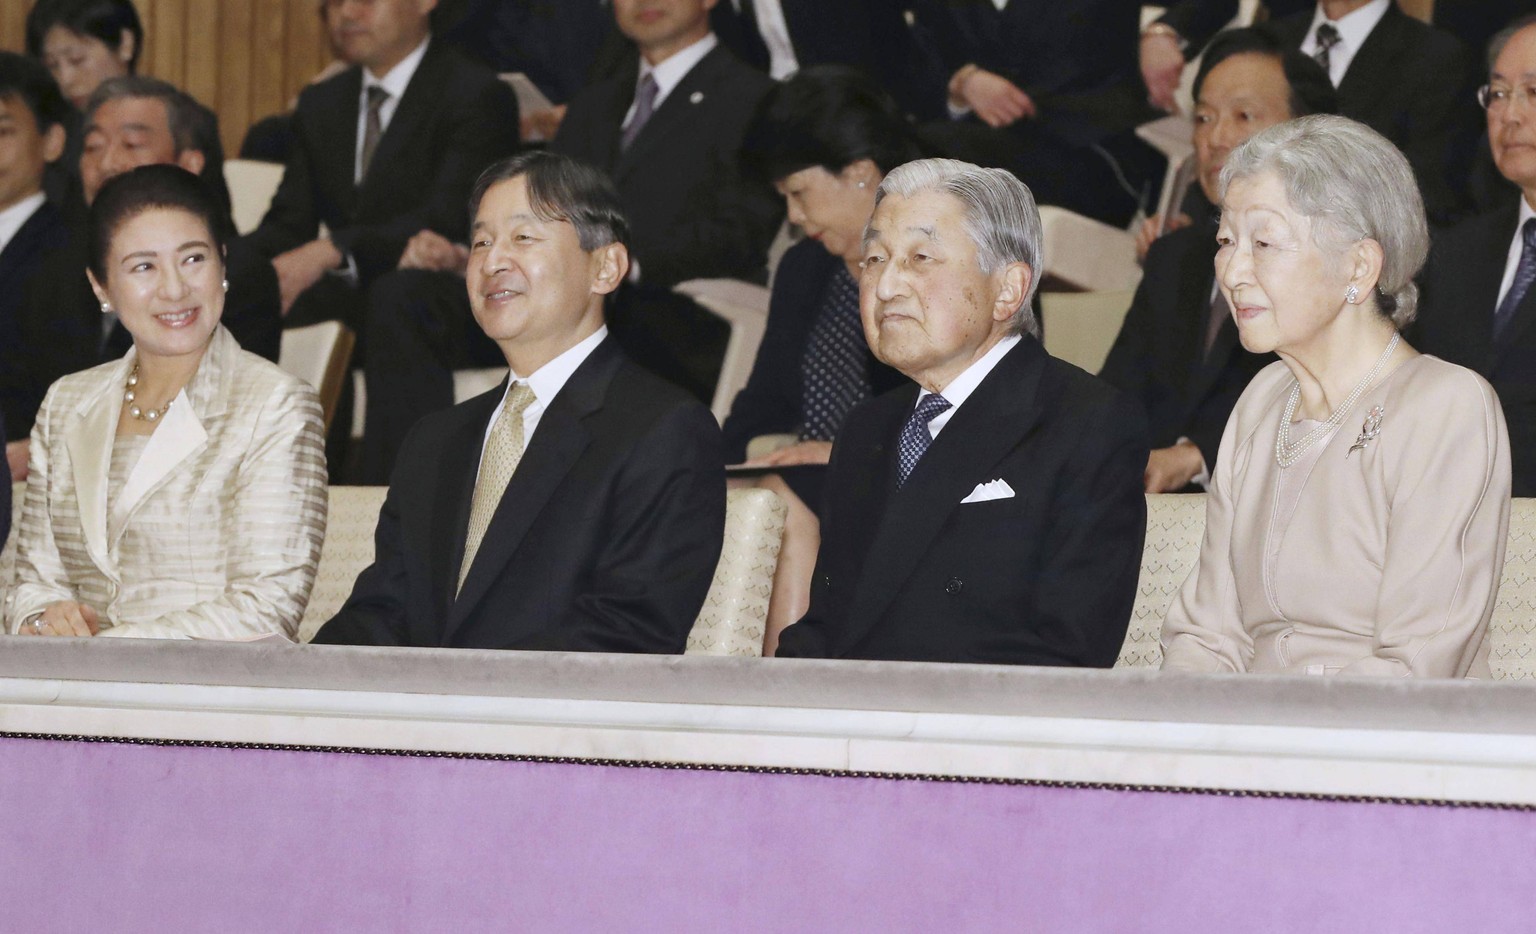 Japanese emperor at concert Japanese Emperor Akihito (2nd from R), Empress Michiko (R), Crown Prince Naruhito (2nd from L) and Crown Princess Masako attend a concert being held at the Imperial Palace  ...